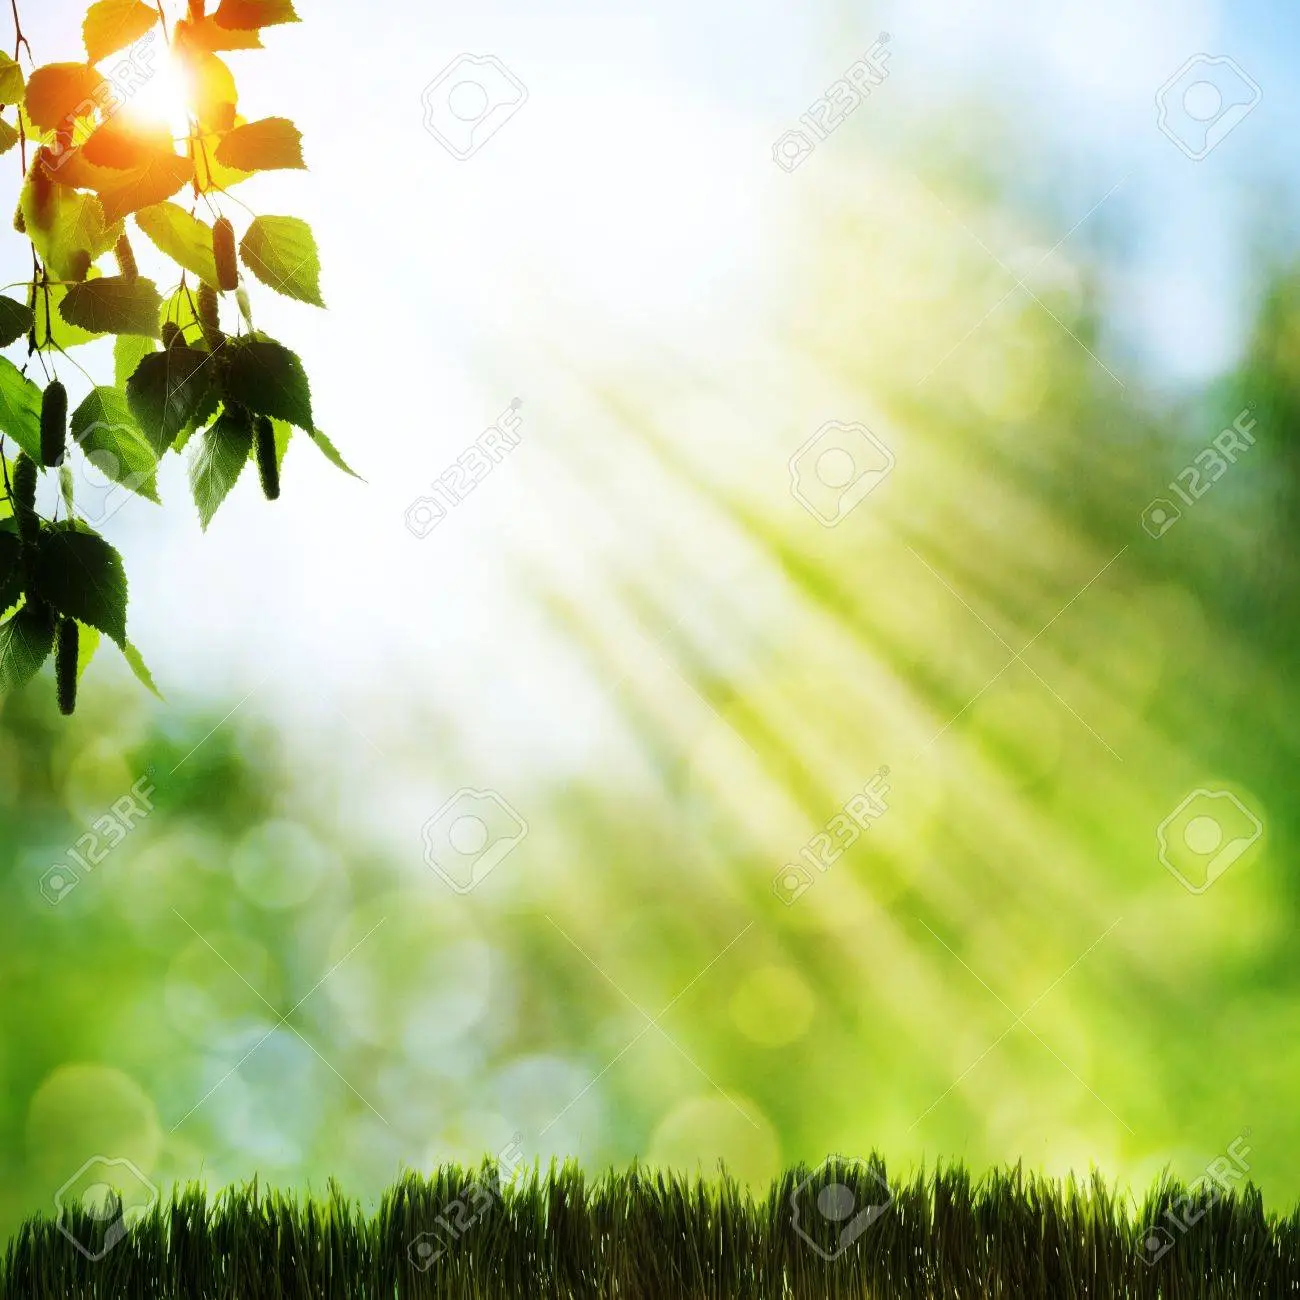 Abstract natural backgrounds with beauty bokeh stock photo picture and royalty free image image